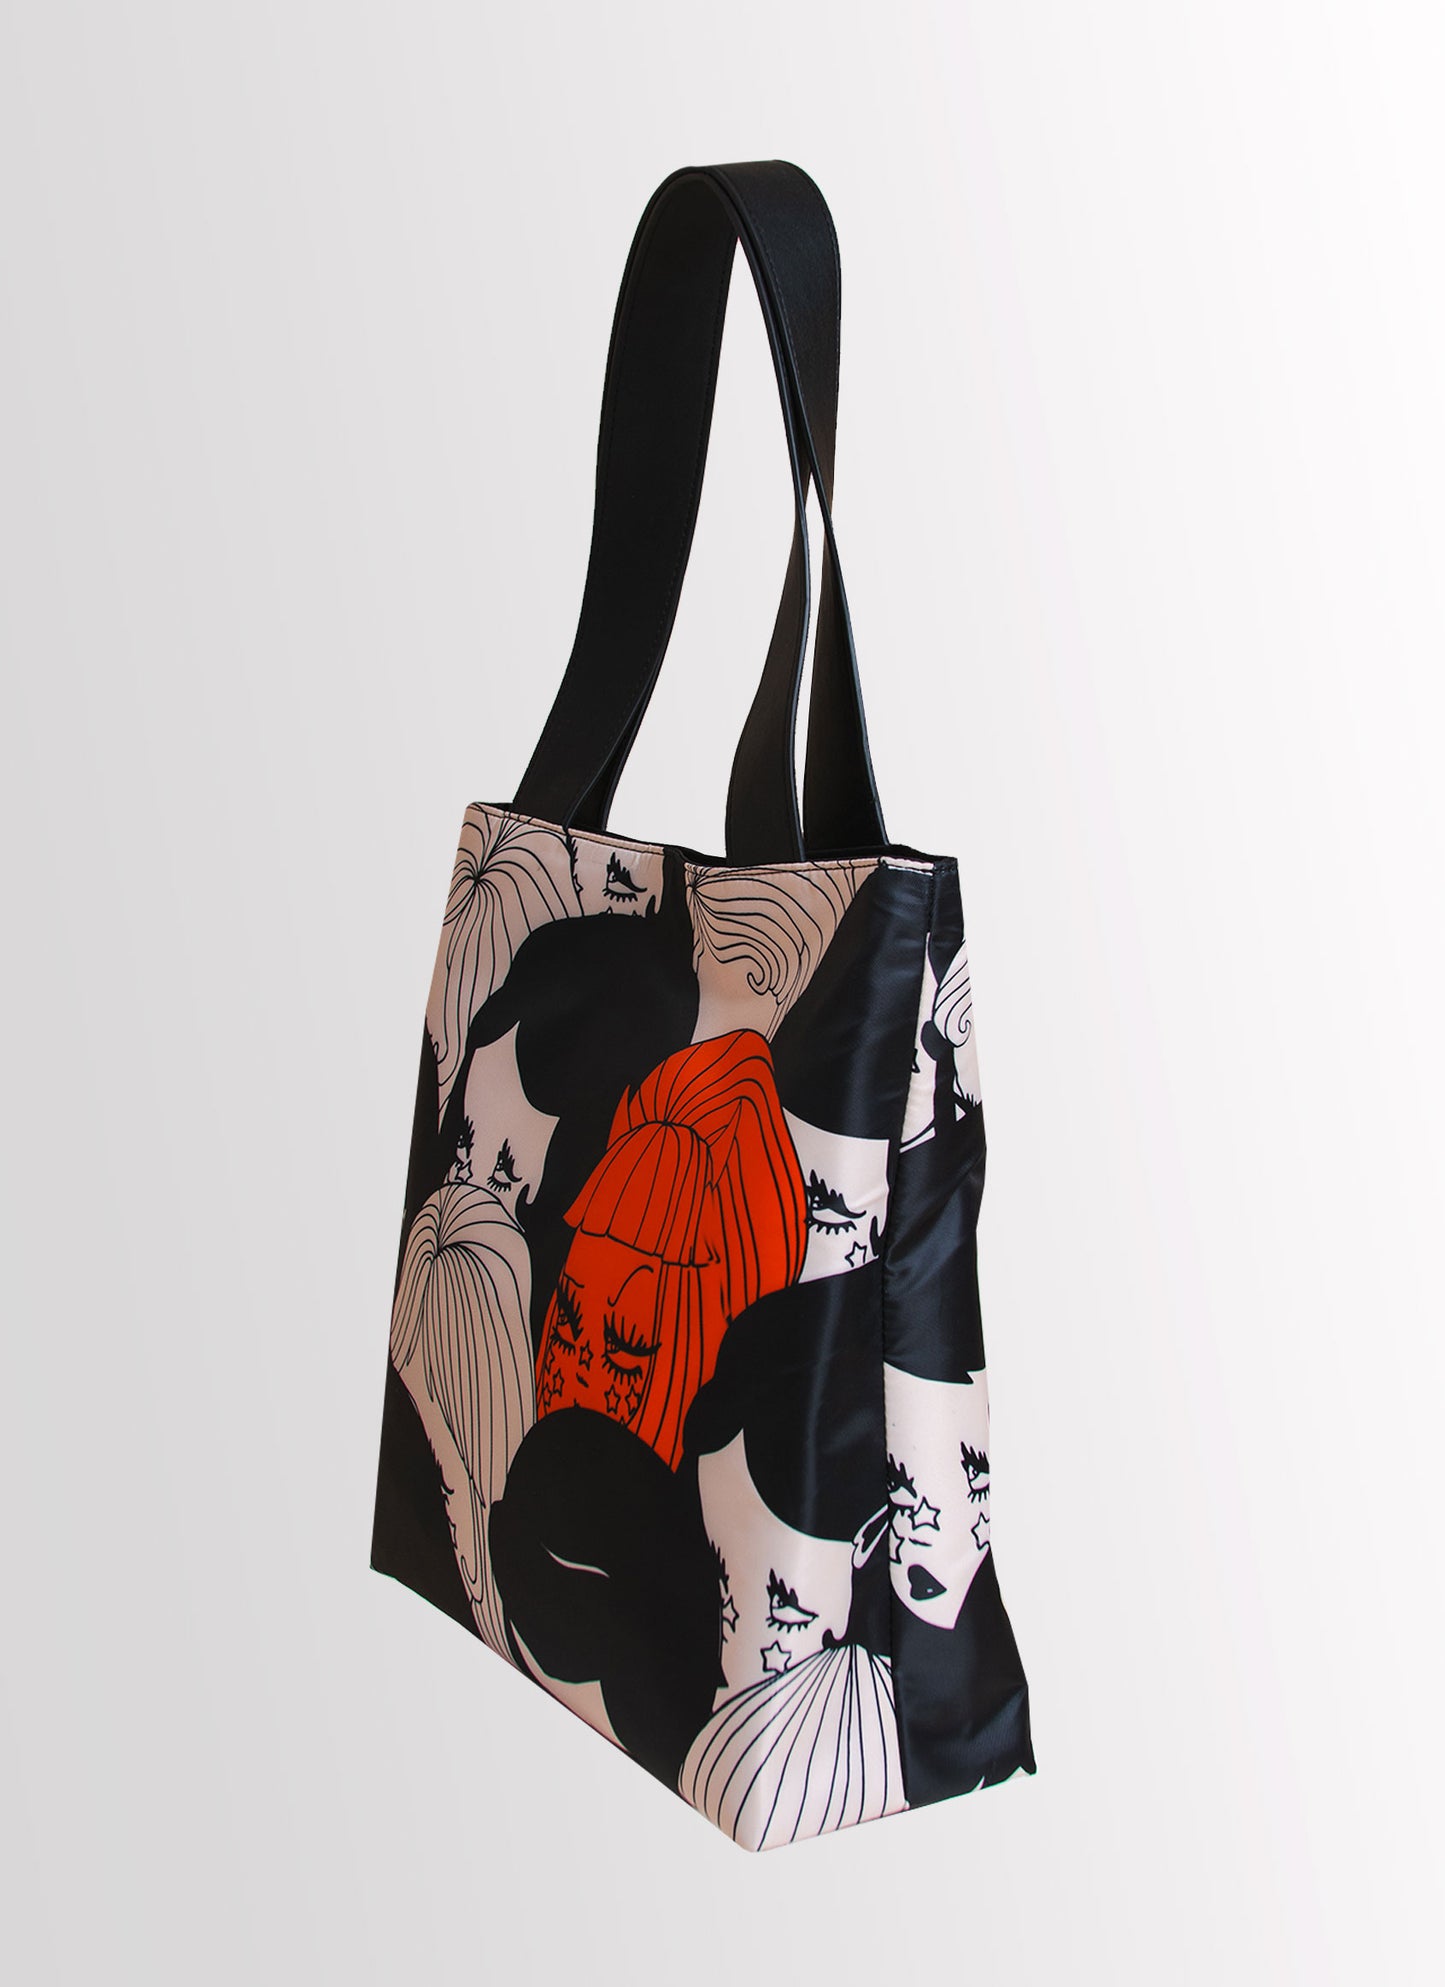 Gathering Limited Edition Tote Bag